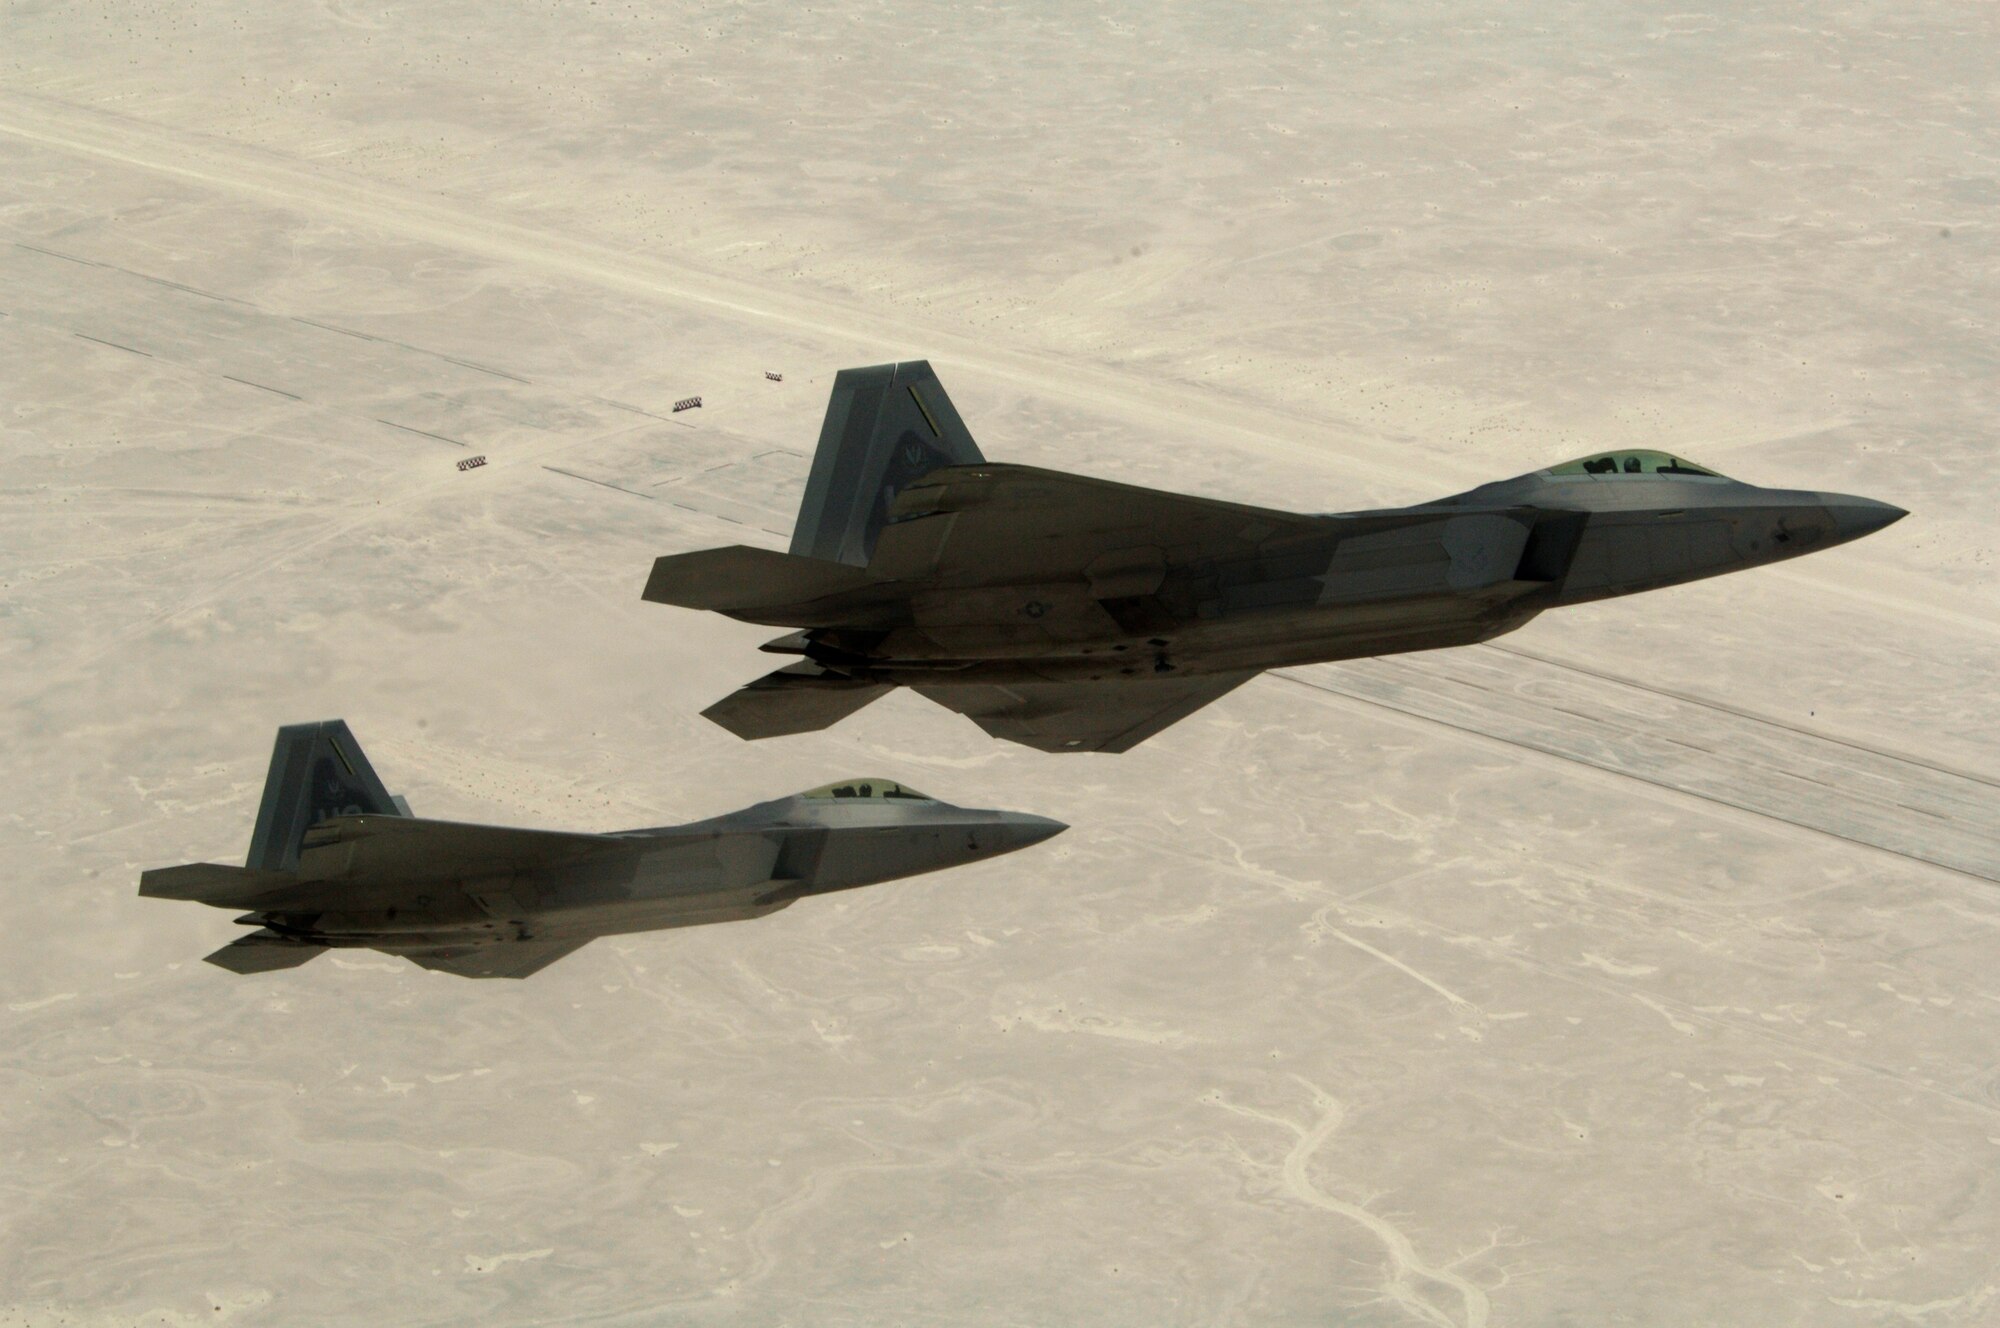 Col. Jeff Harrigian, 49th Fighter Wing commander, and Lt. Col. Mike Hernandez, 7th Fighter Squadron commander, fly a pair of F-22A Raptors over White Sands Missile Range, on the way to Holloman Air Force Base, N.M., June 2. The jets are the first two Holloman-tailed F-22's to arrive on base. (U.S. Air Force Photo/ Senior Airman Russell Scalf)